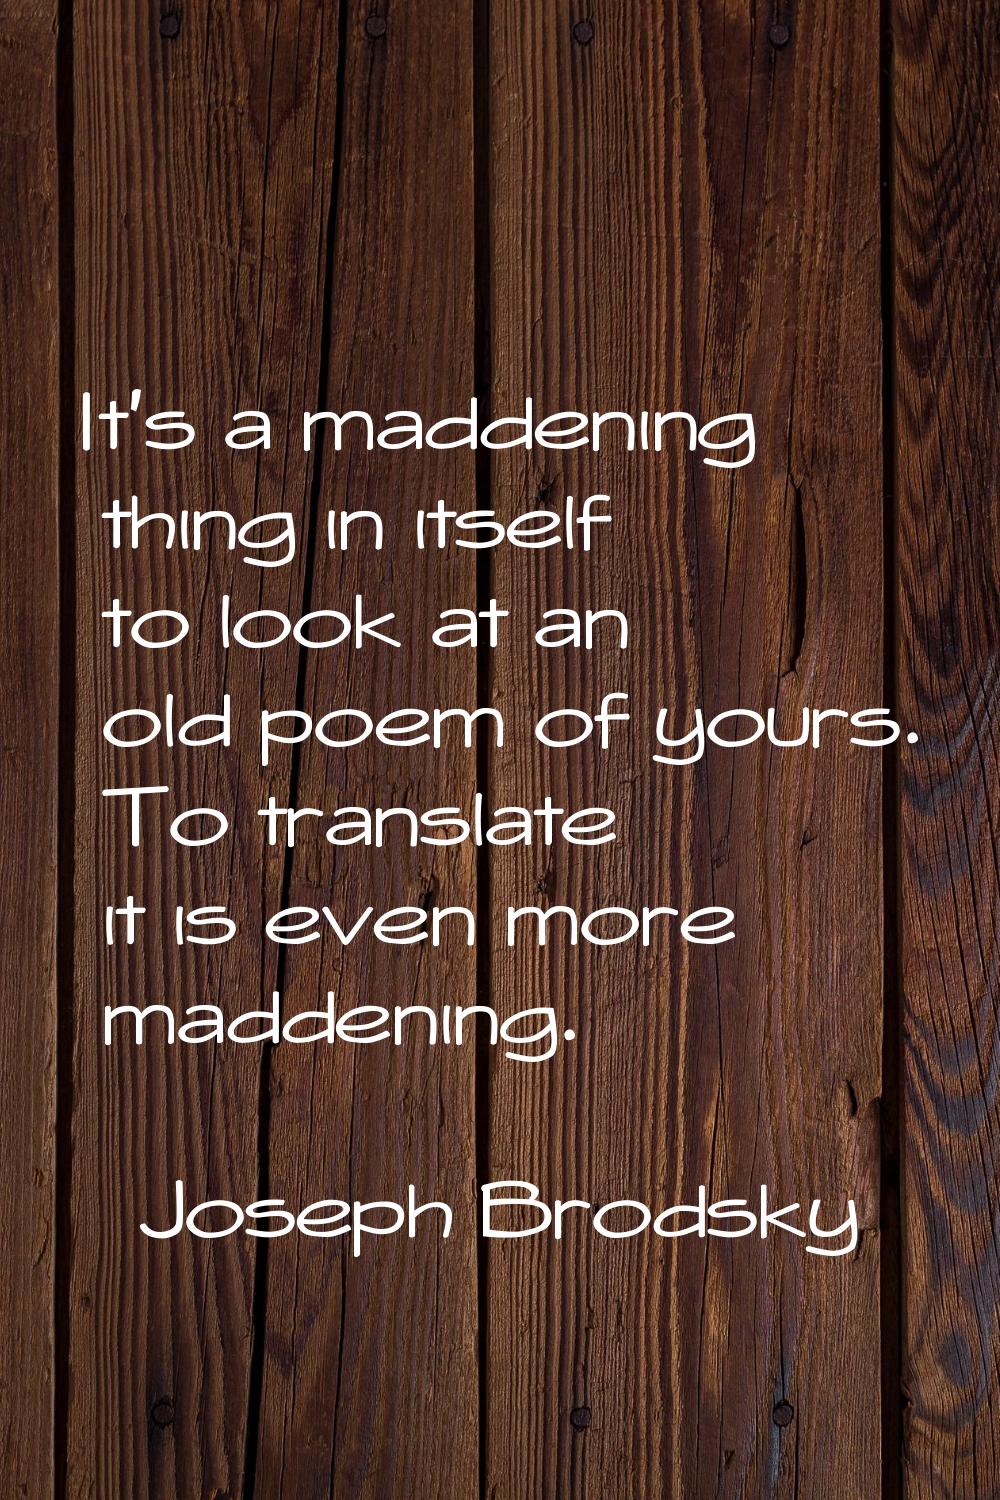 It's a maddening thing in itself to look at an old poem of yours. To translate it is even more madd